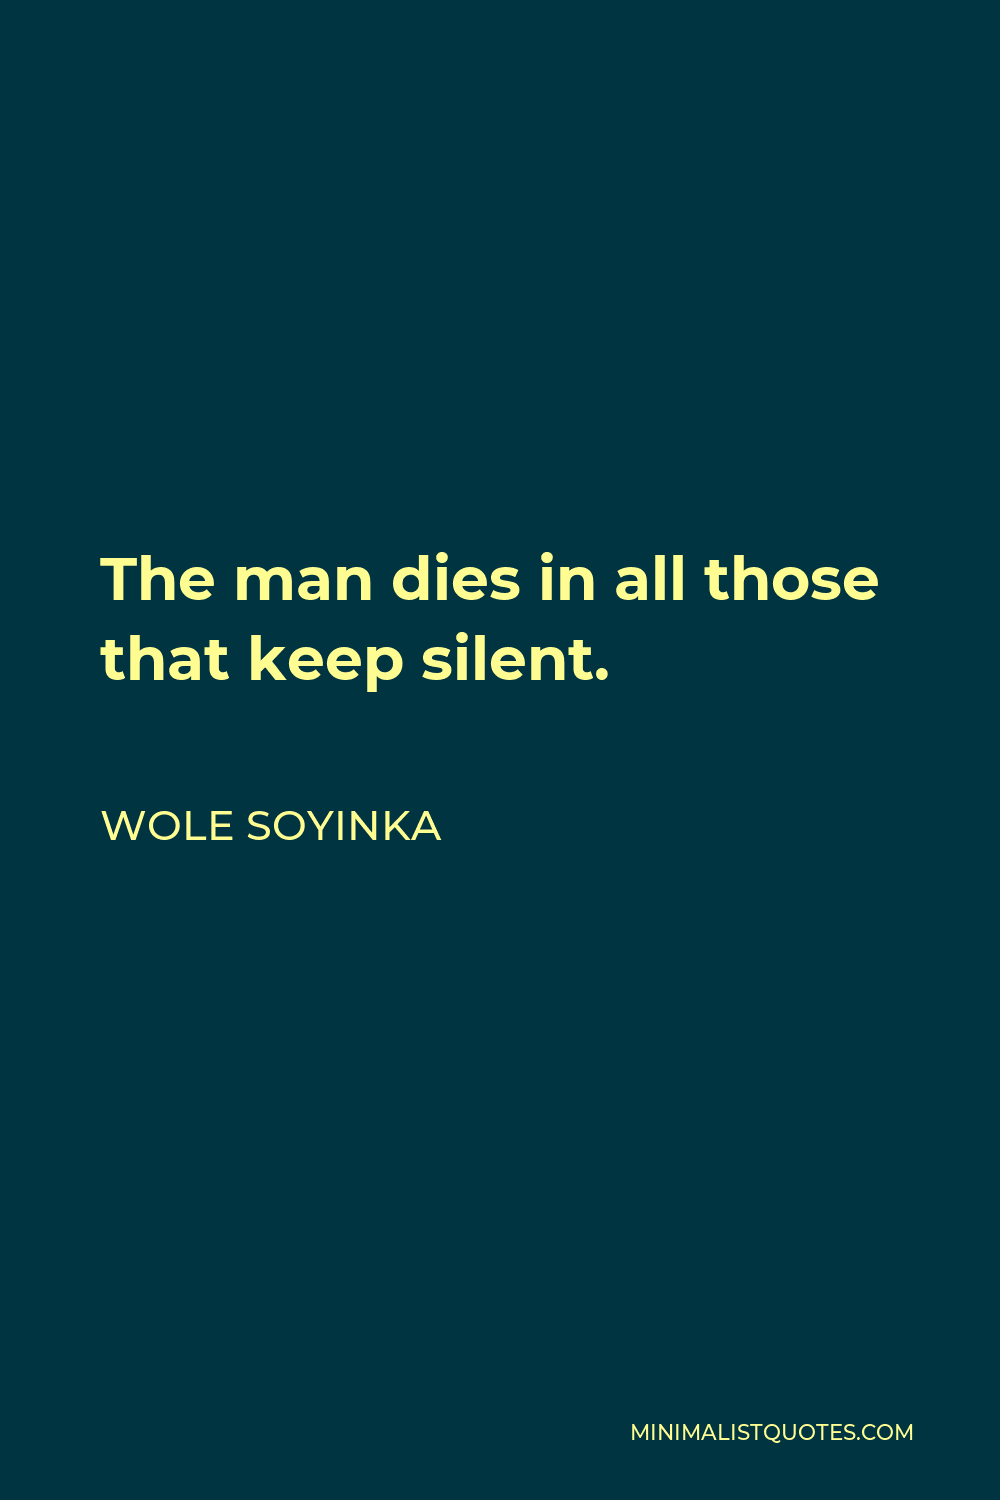 Wole Soyinka Quote - The man dies in all those that keep silent.